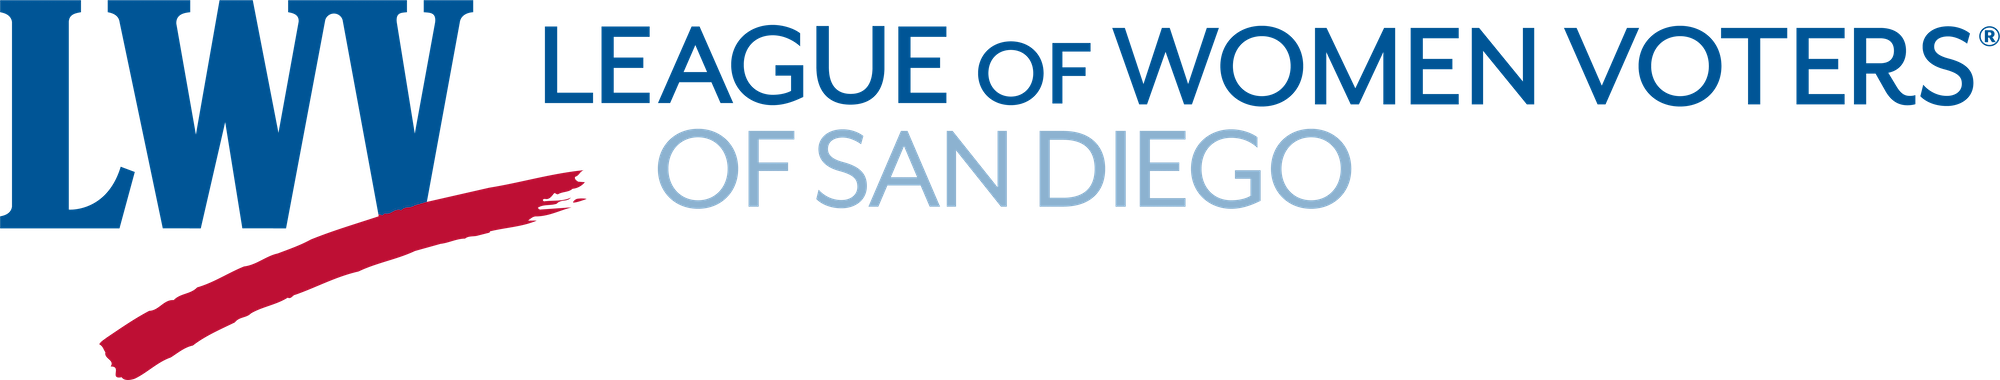 League of Women Voters of San Diego